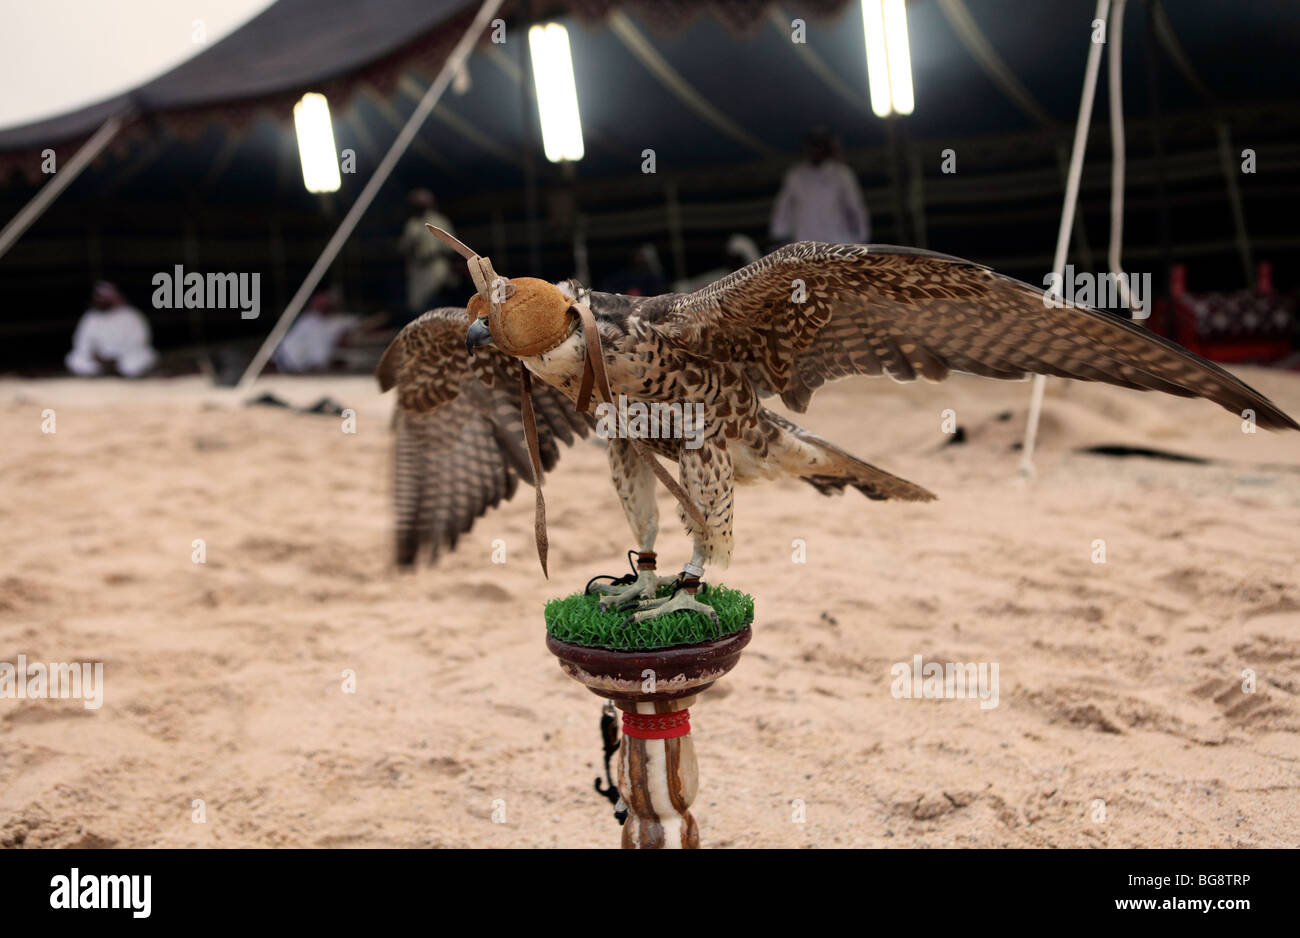 A hunting falcon tethered to a post stretches its wings at dusk in a desert camp in Qatar, Arabia Stock Photo